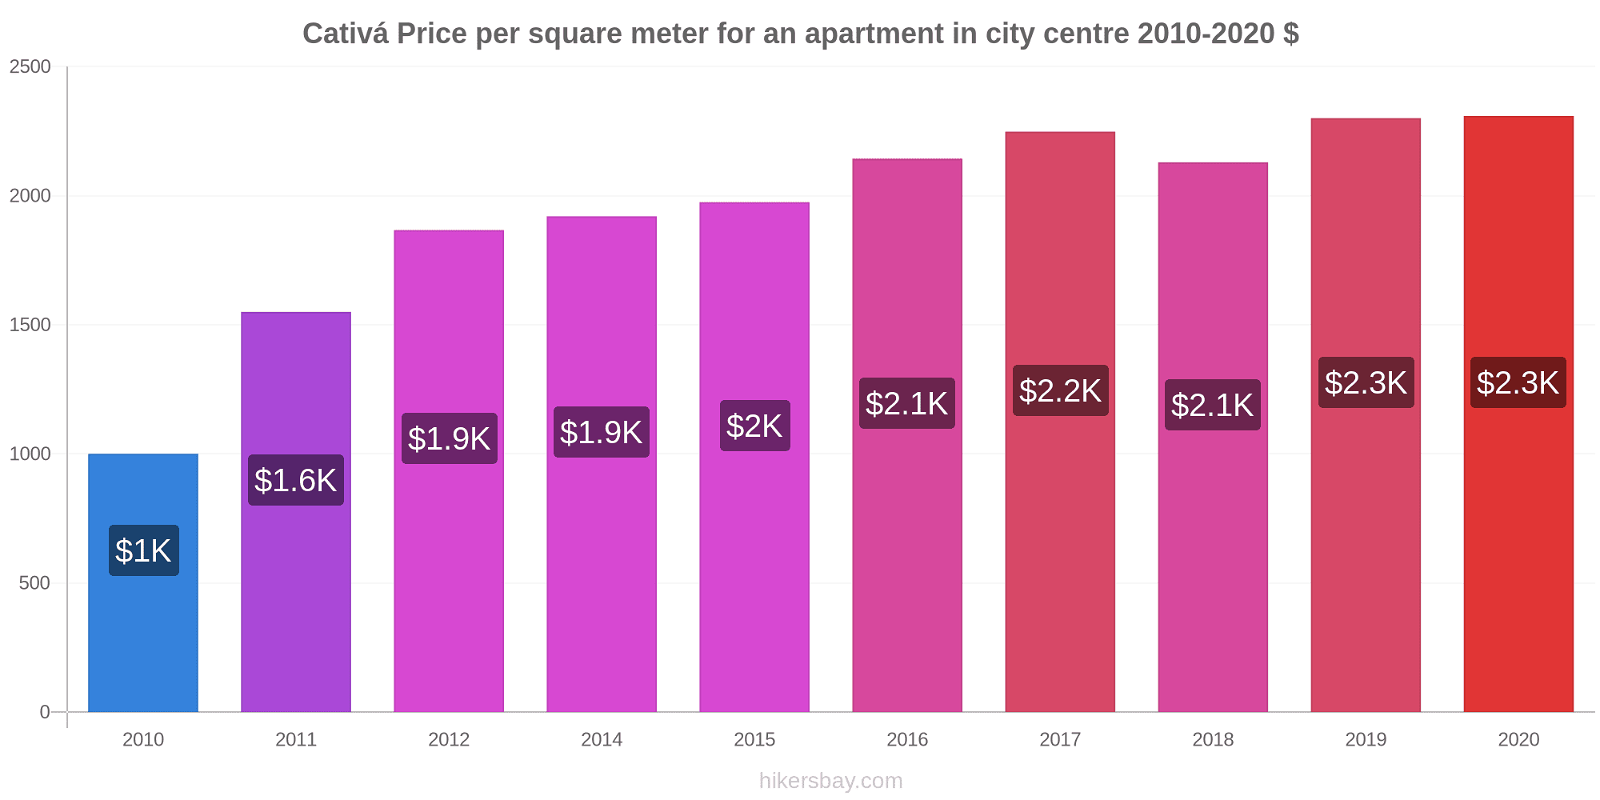 Cativá price changes Price per square meter for an apartment in city centre hikersbay.com